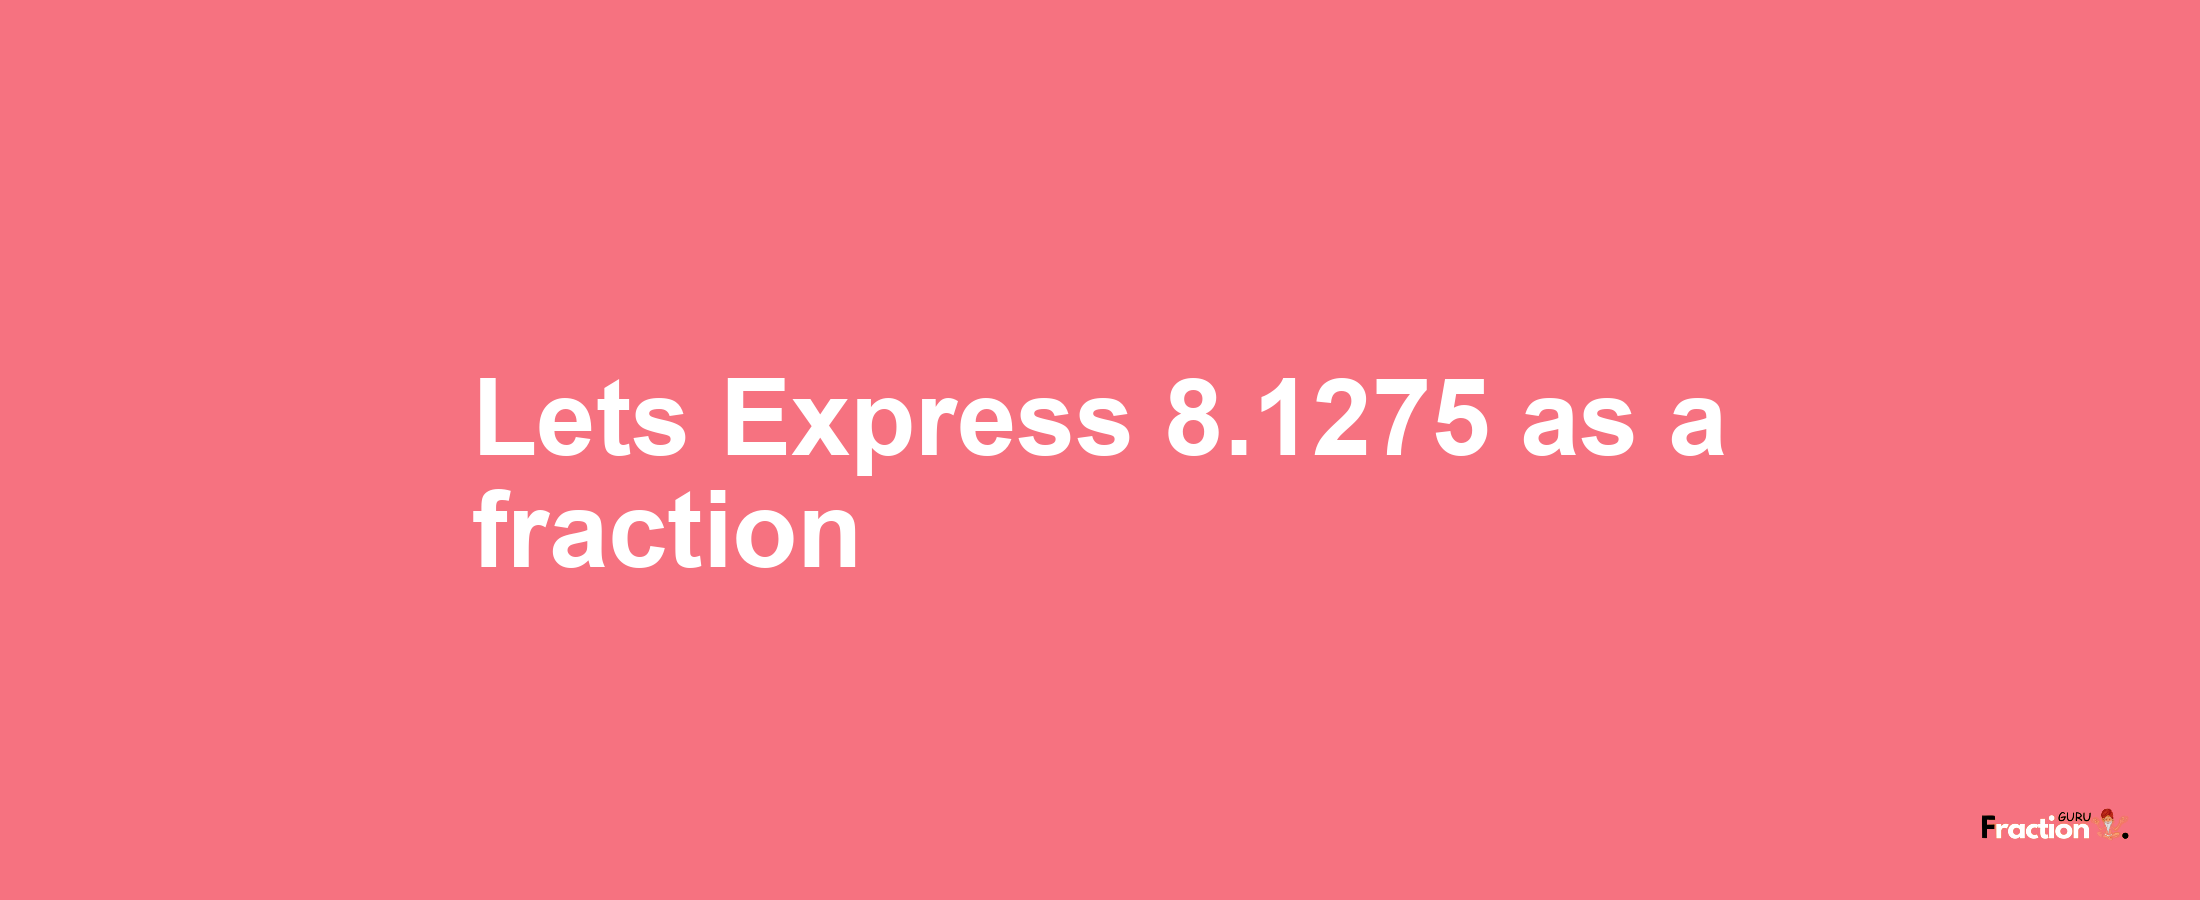 Lets Express 8.1275 as afraction